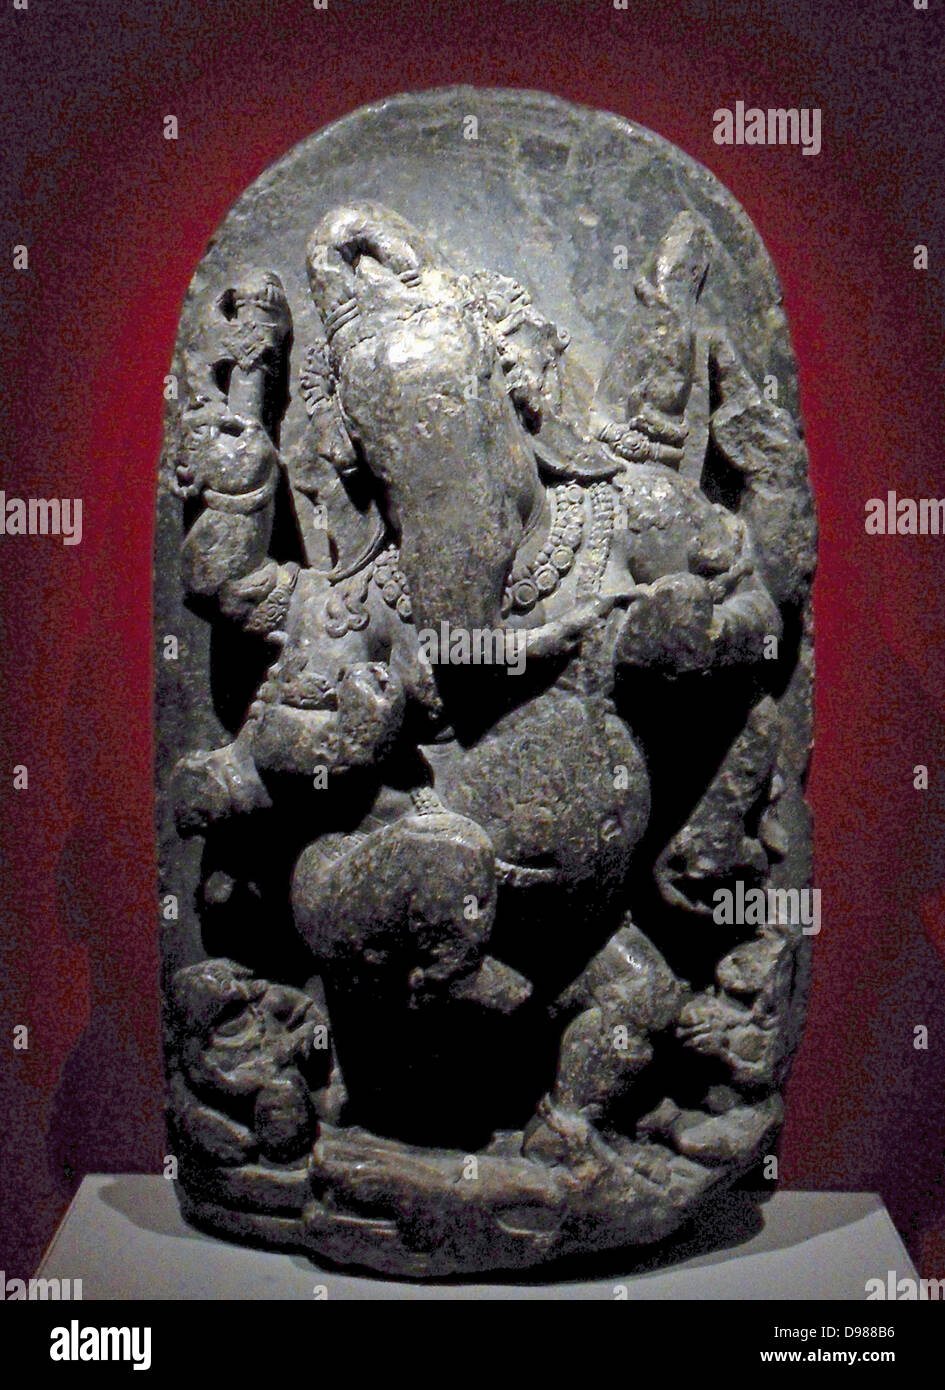 Dancing Ganesha Stone sculpture western India, AD 650-750. Dancing merrily the elephant god Ganesha (Hindu), is flanked by musicians and holds food. Stock Photo